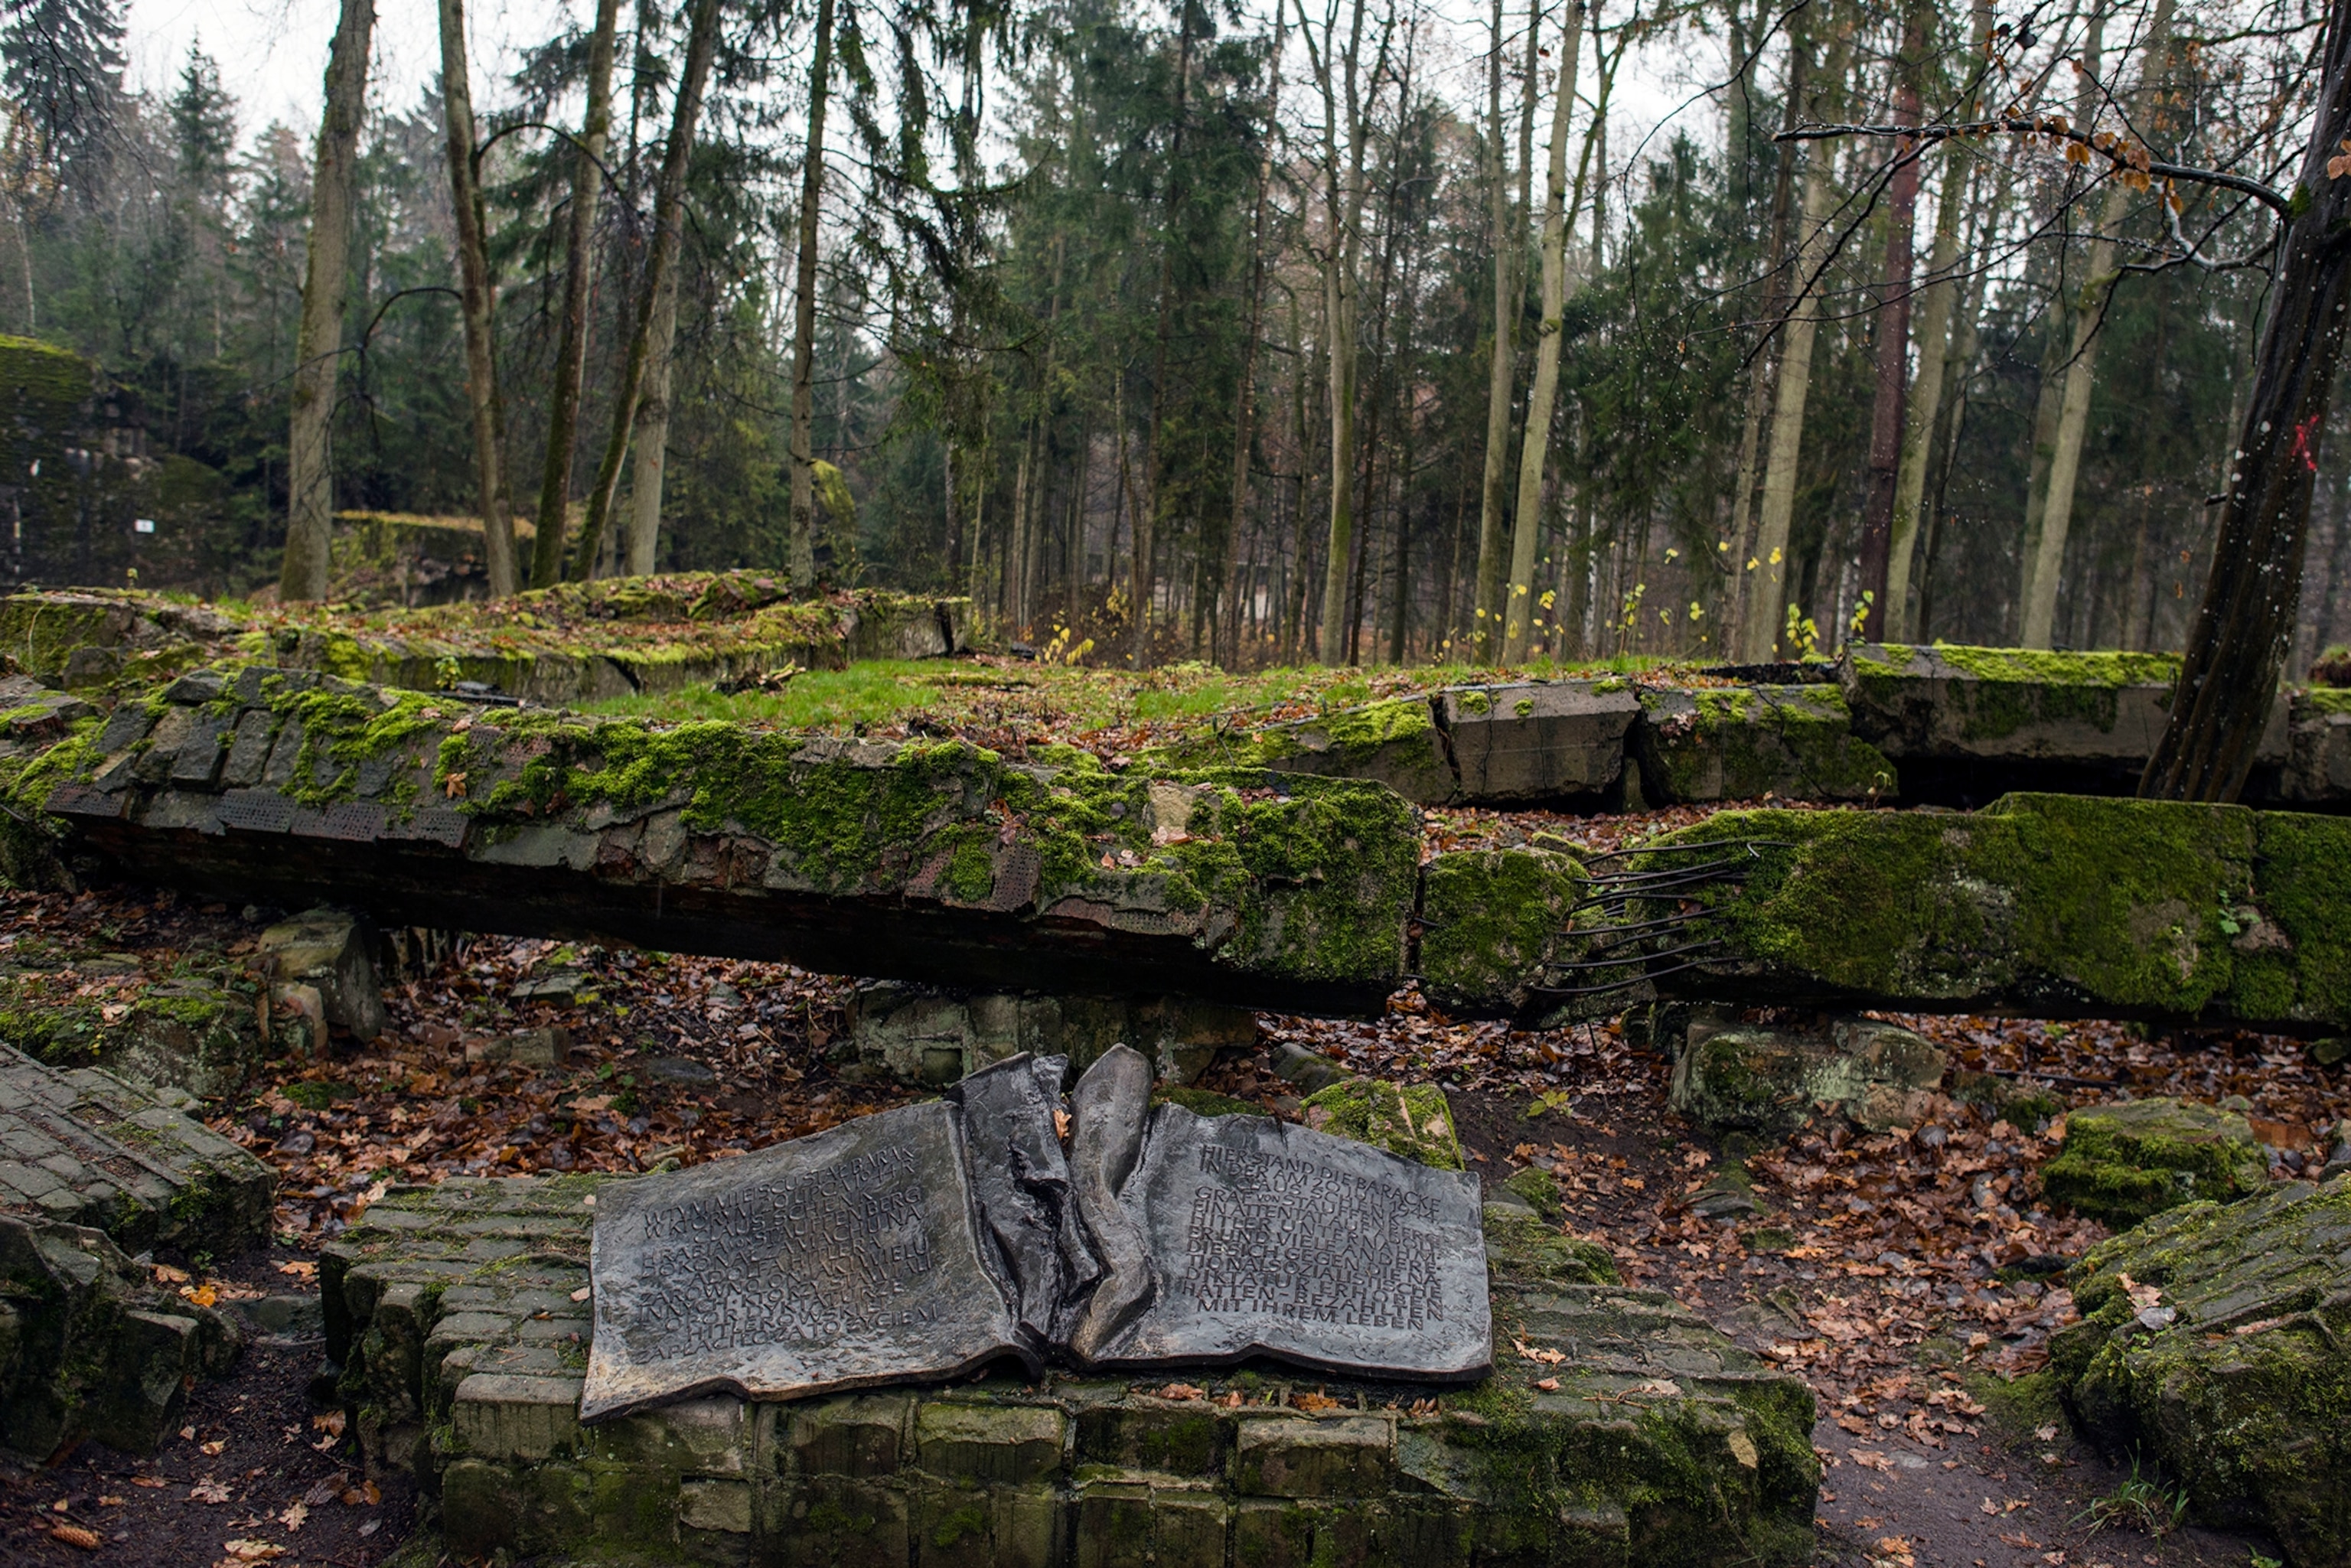 A dark stone carving of a book with text, ruins filled with moss in a wooded area.